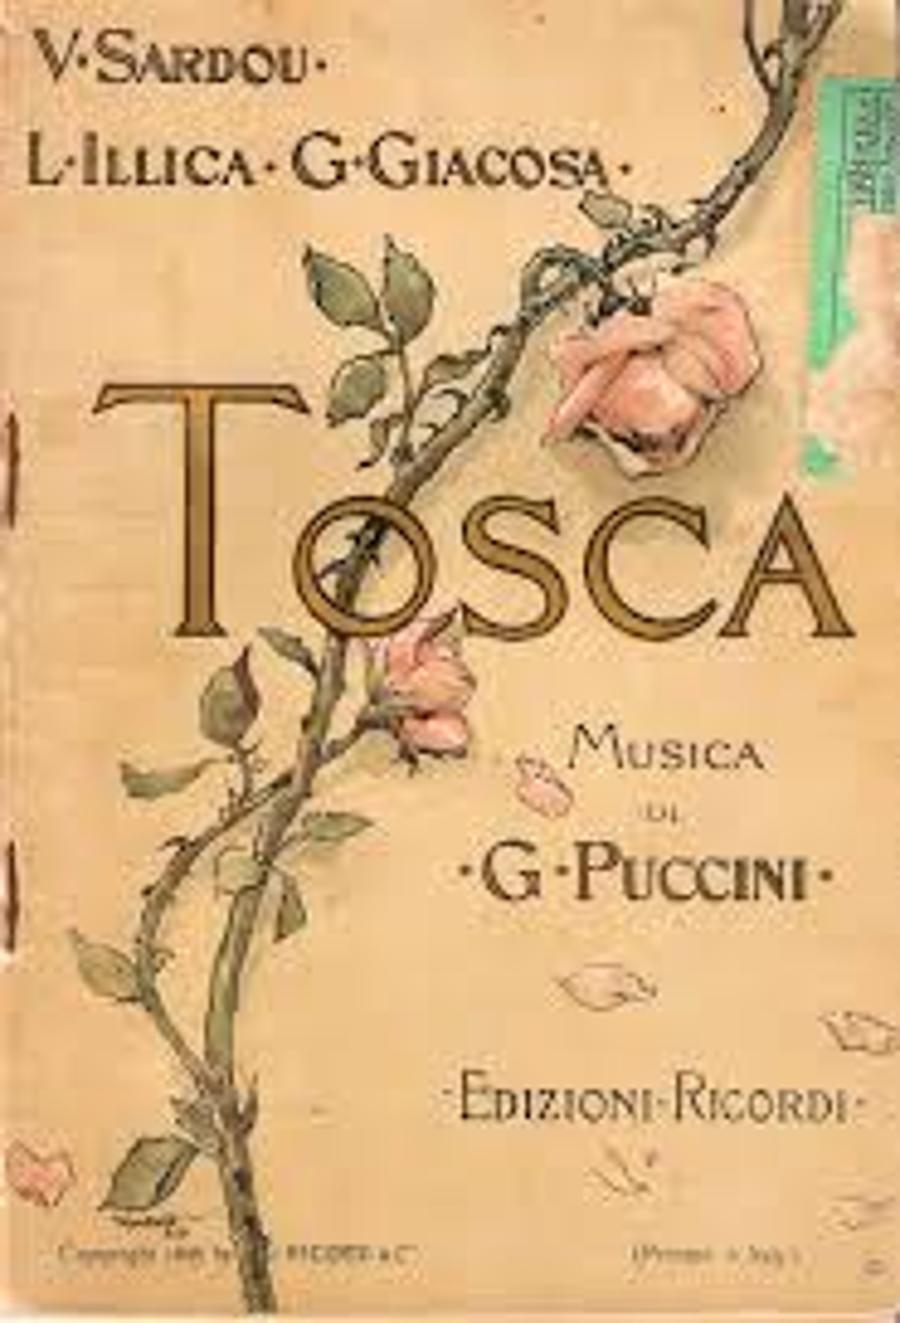 Puccini: Tosca, Hungarian State Opera, Budapest, 21 March